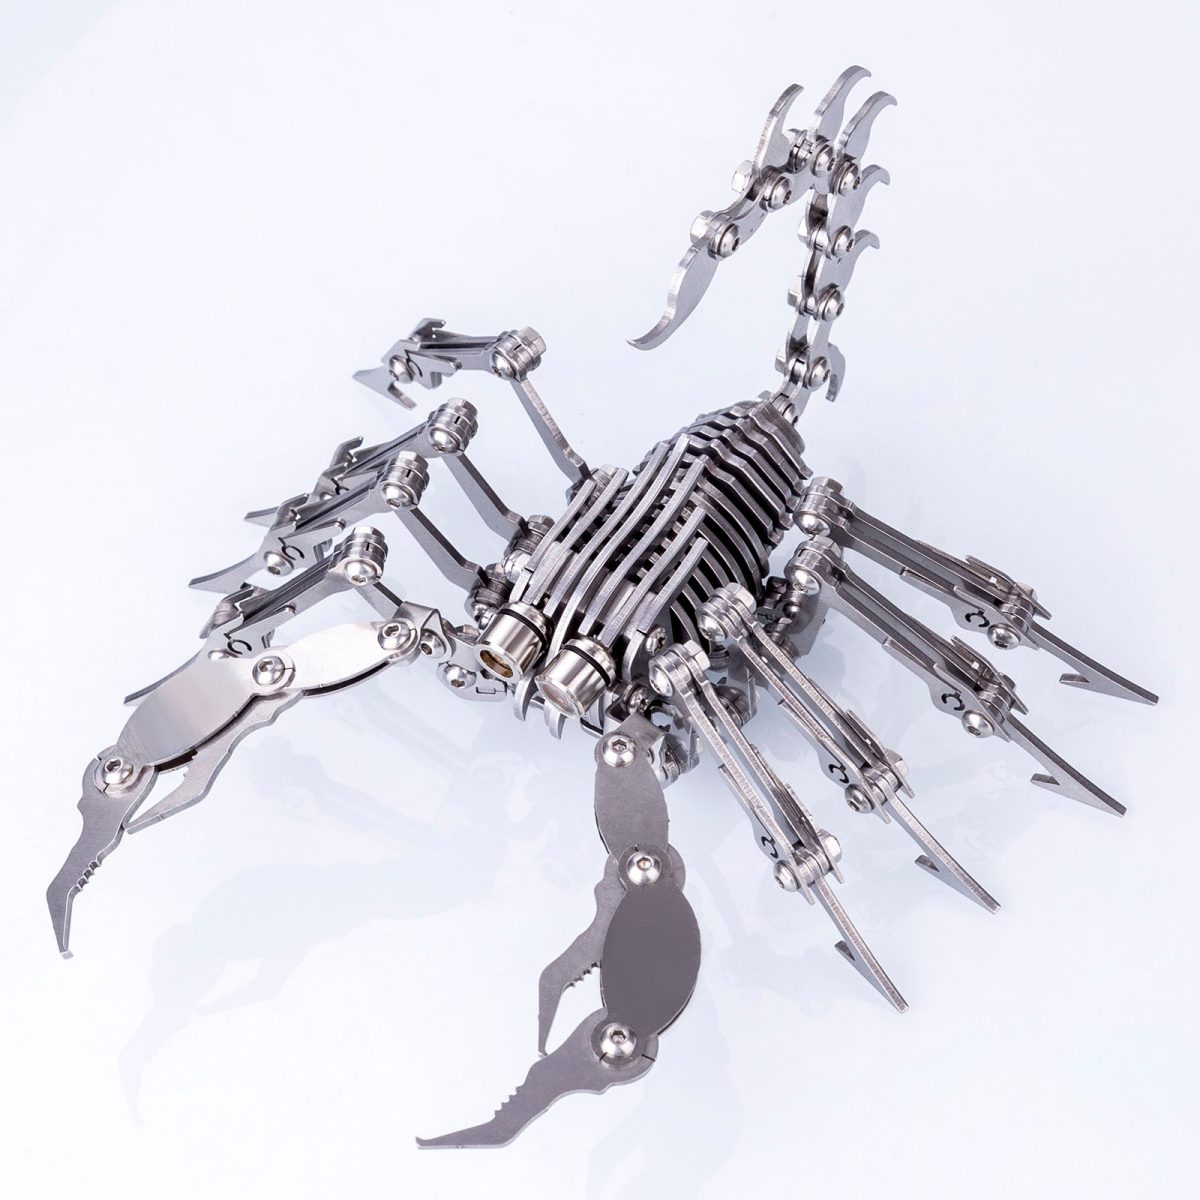 DIY Metal 3D Scorpion Figure 274Pcs Puzzle Model Building Kit for Adults and Kids, with Light